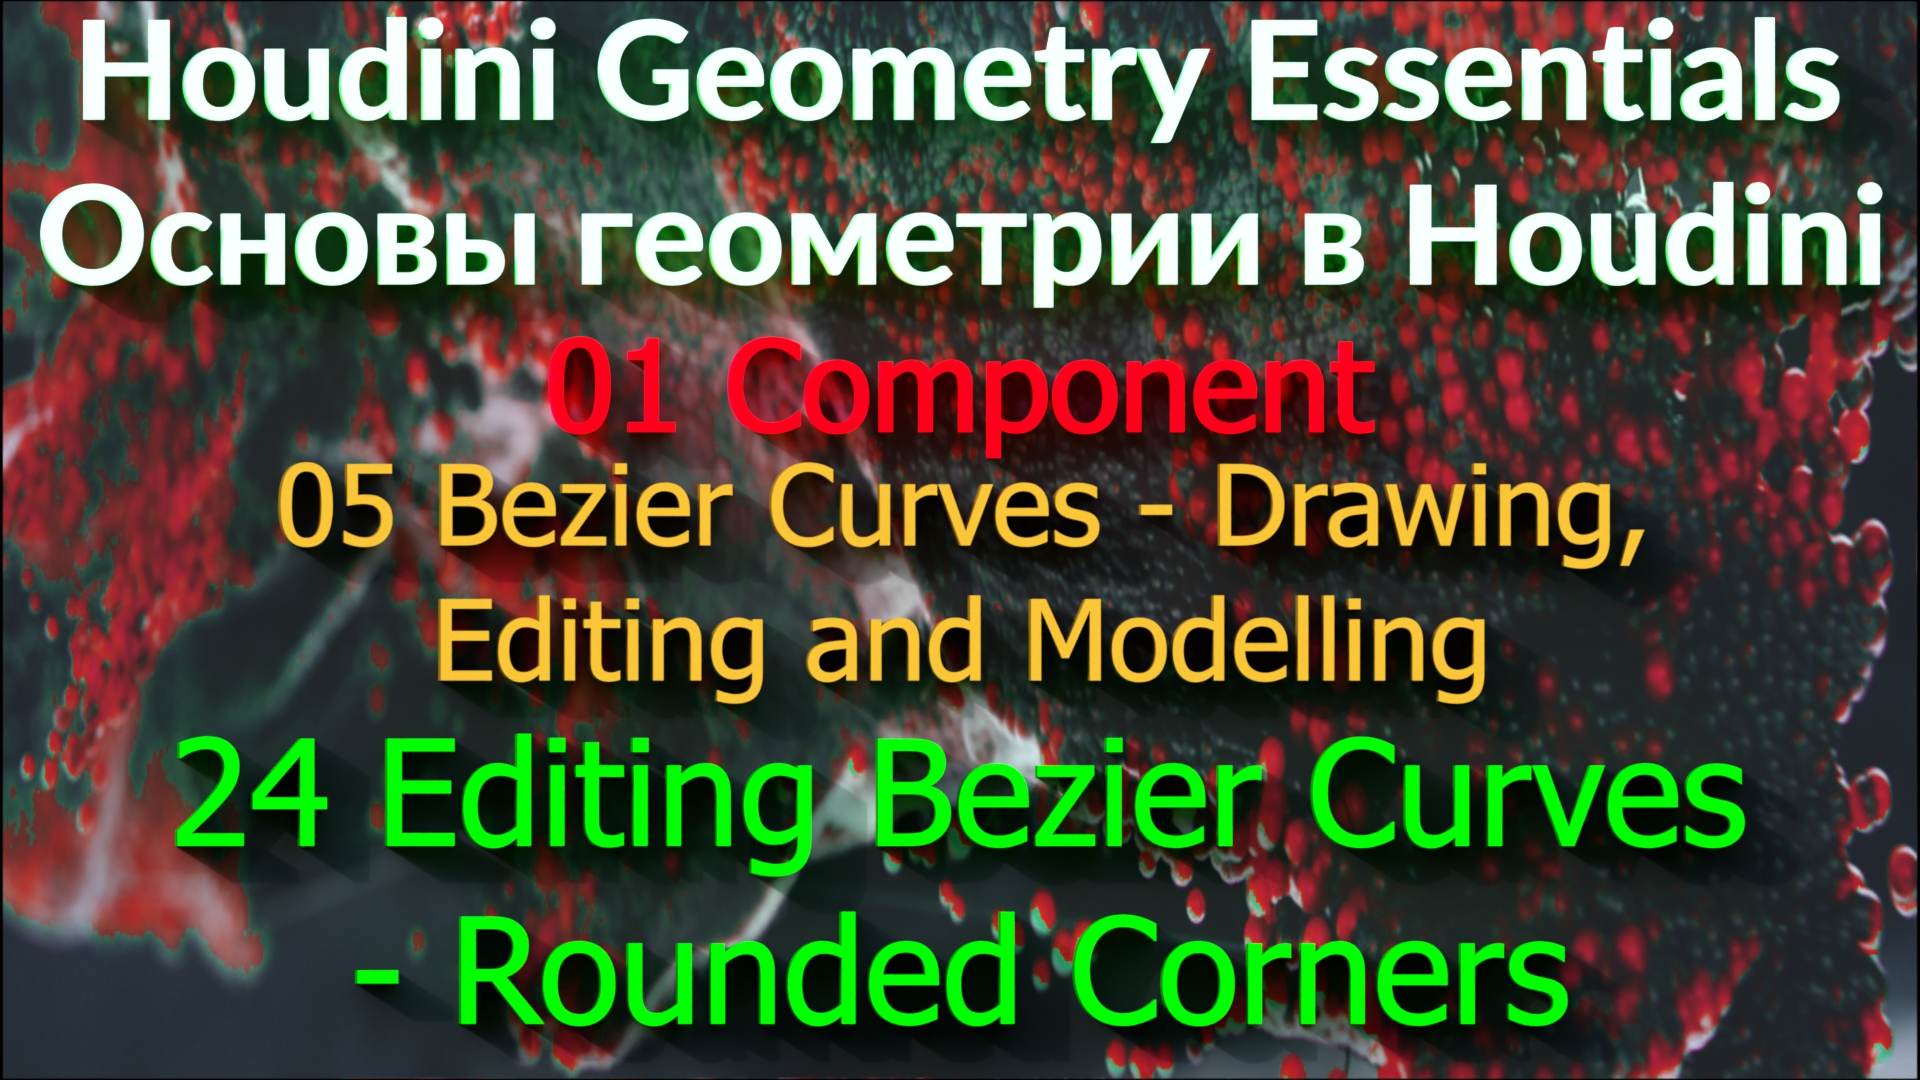 01_05_24. Editing Bezier Curves - Rounded Corners